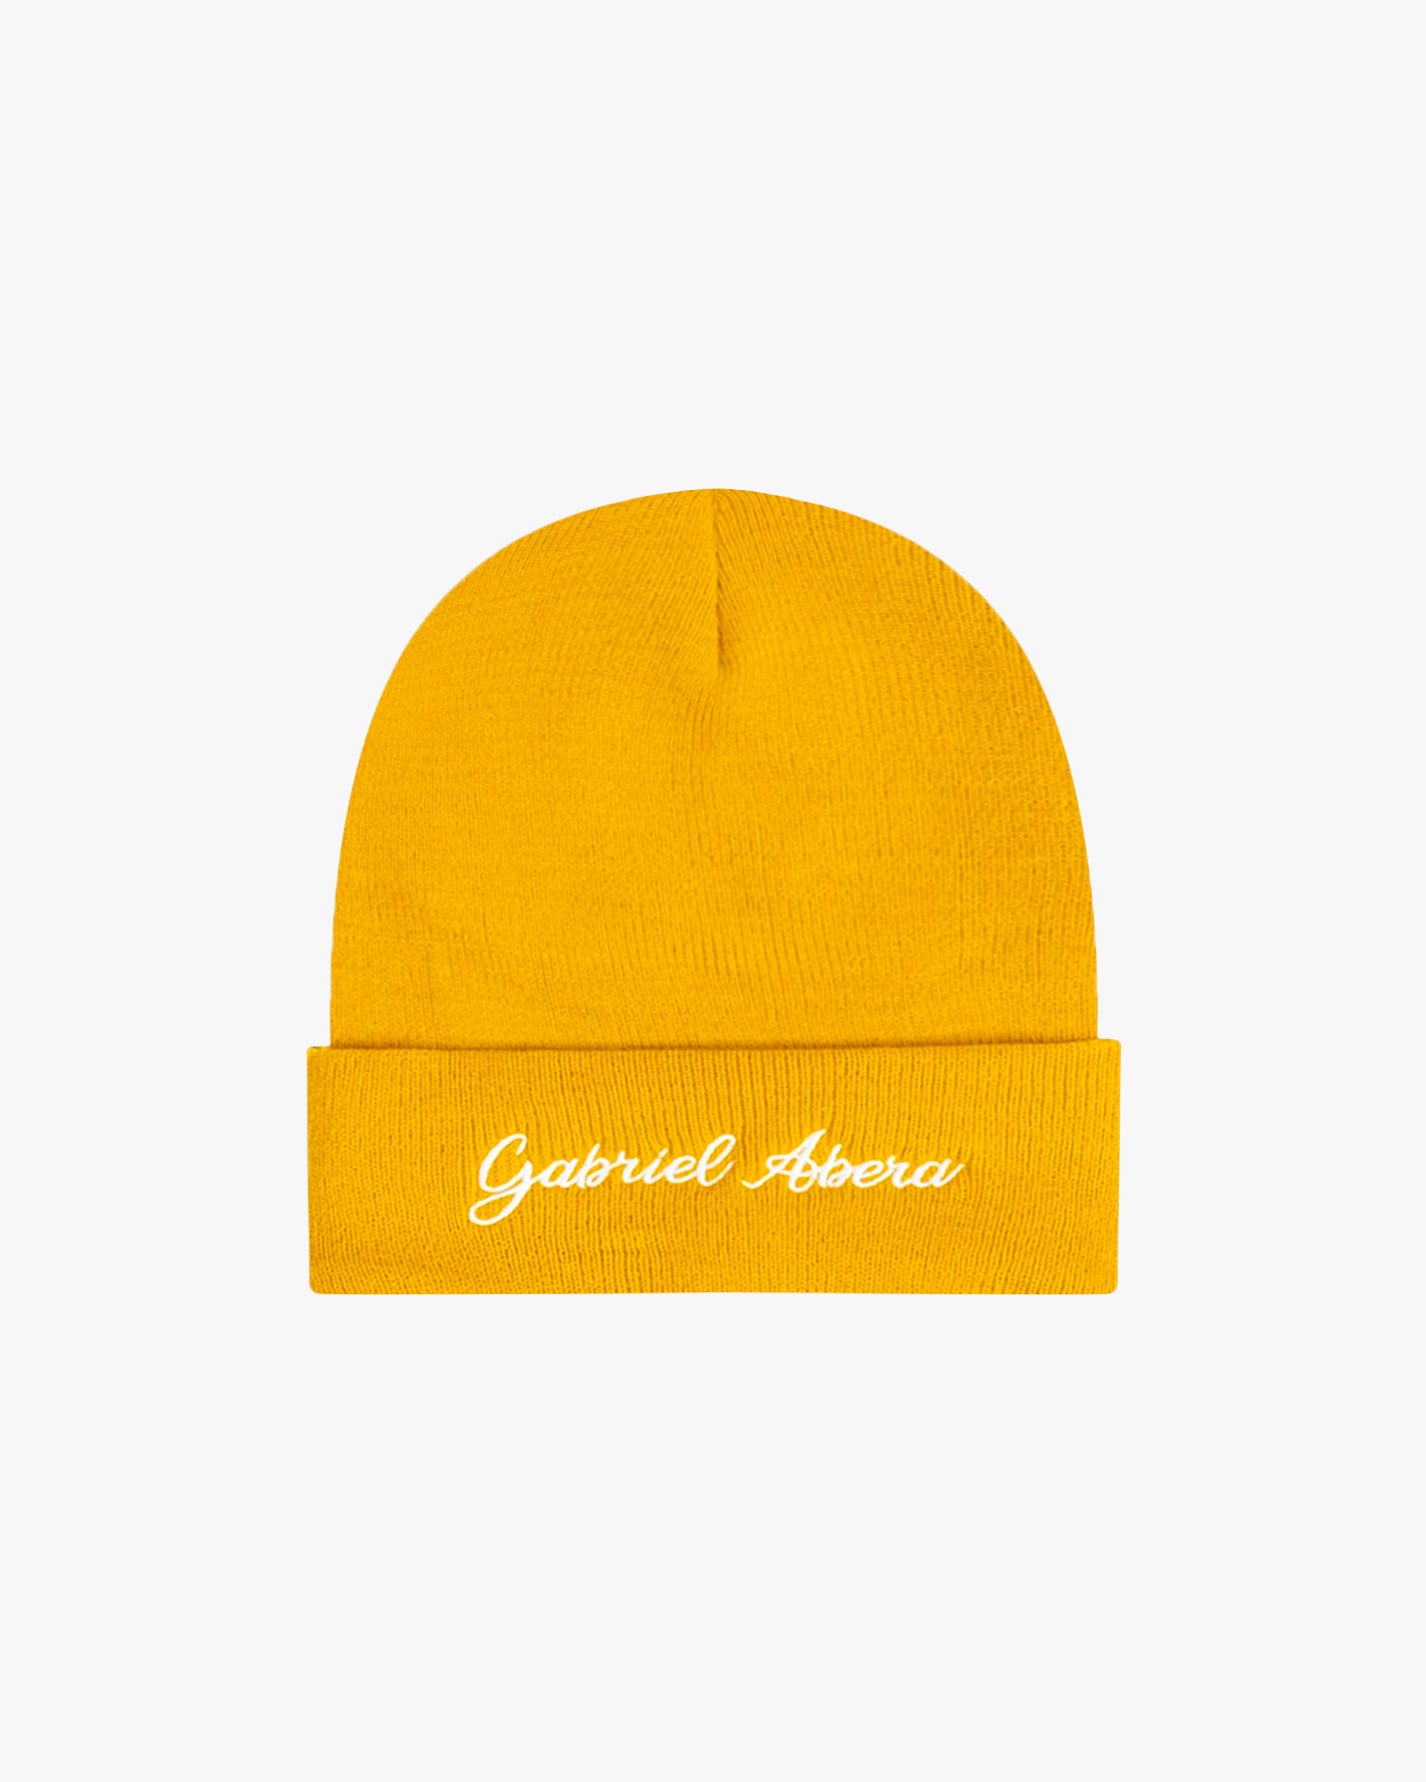 Yellow beanie with brand name embroidery